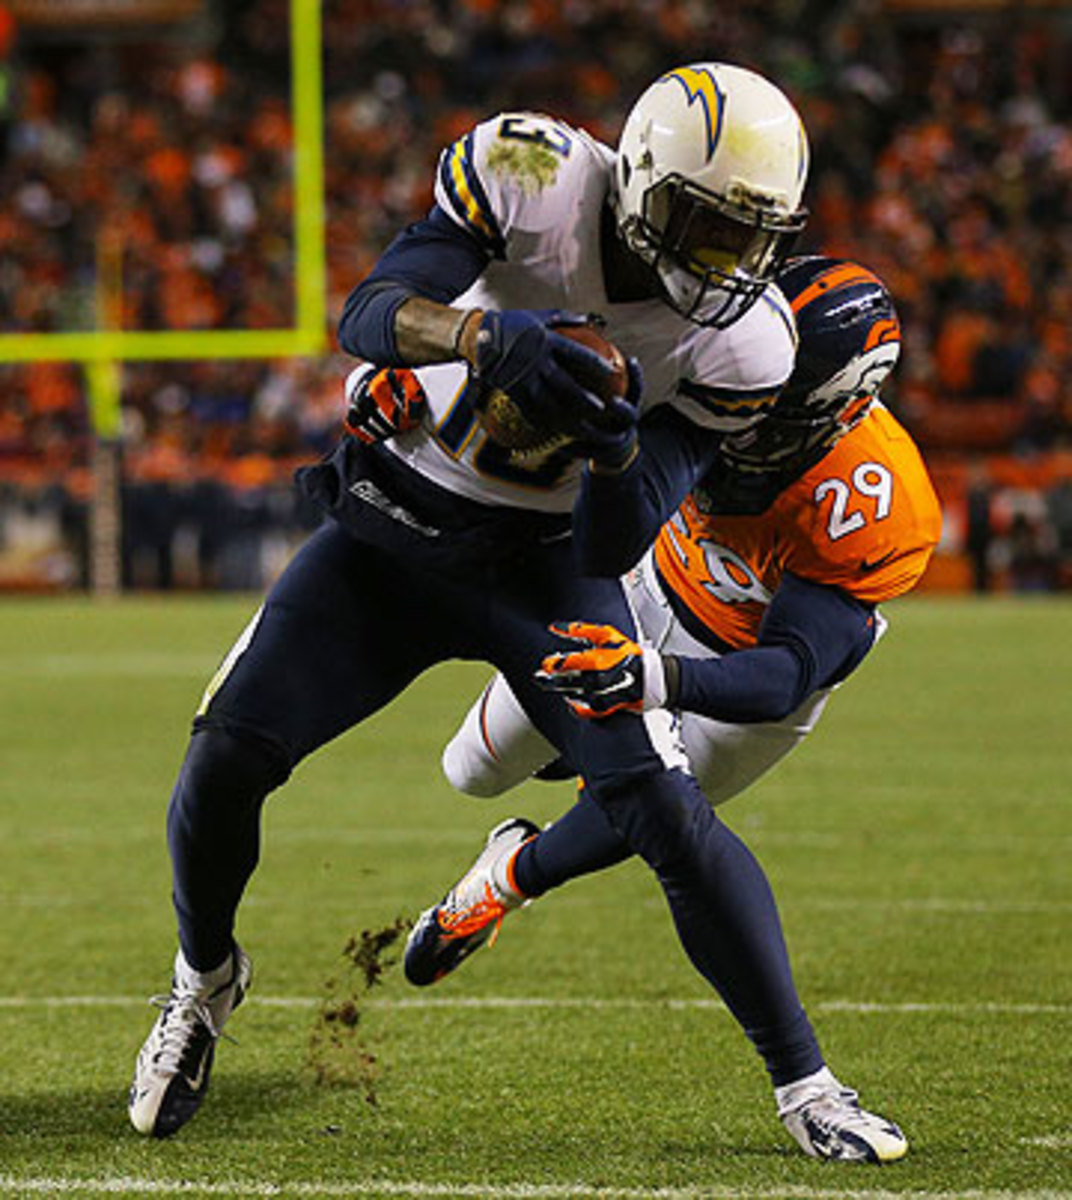 Keenan Allen's 71 receptions in 2013 was the most by a rookie over the past five years. (Justin Edmonds/Getty Images)